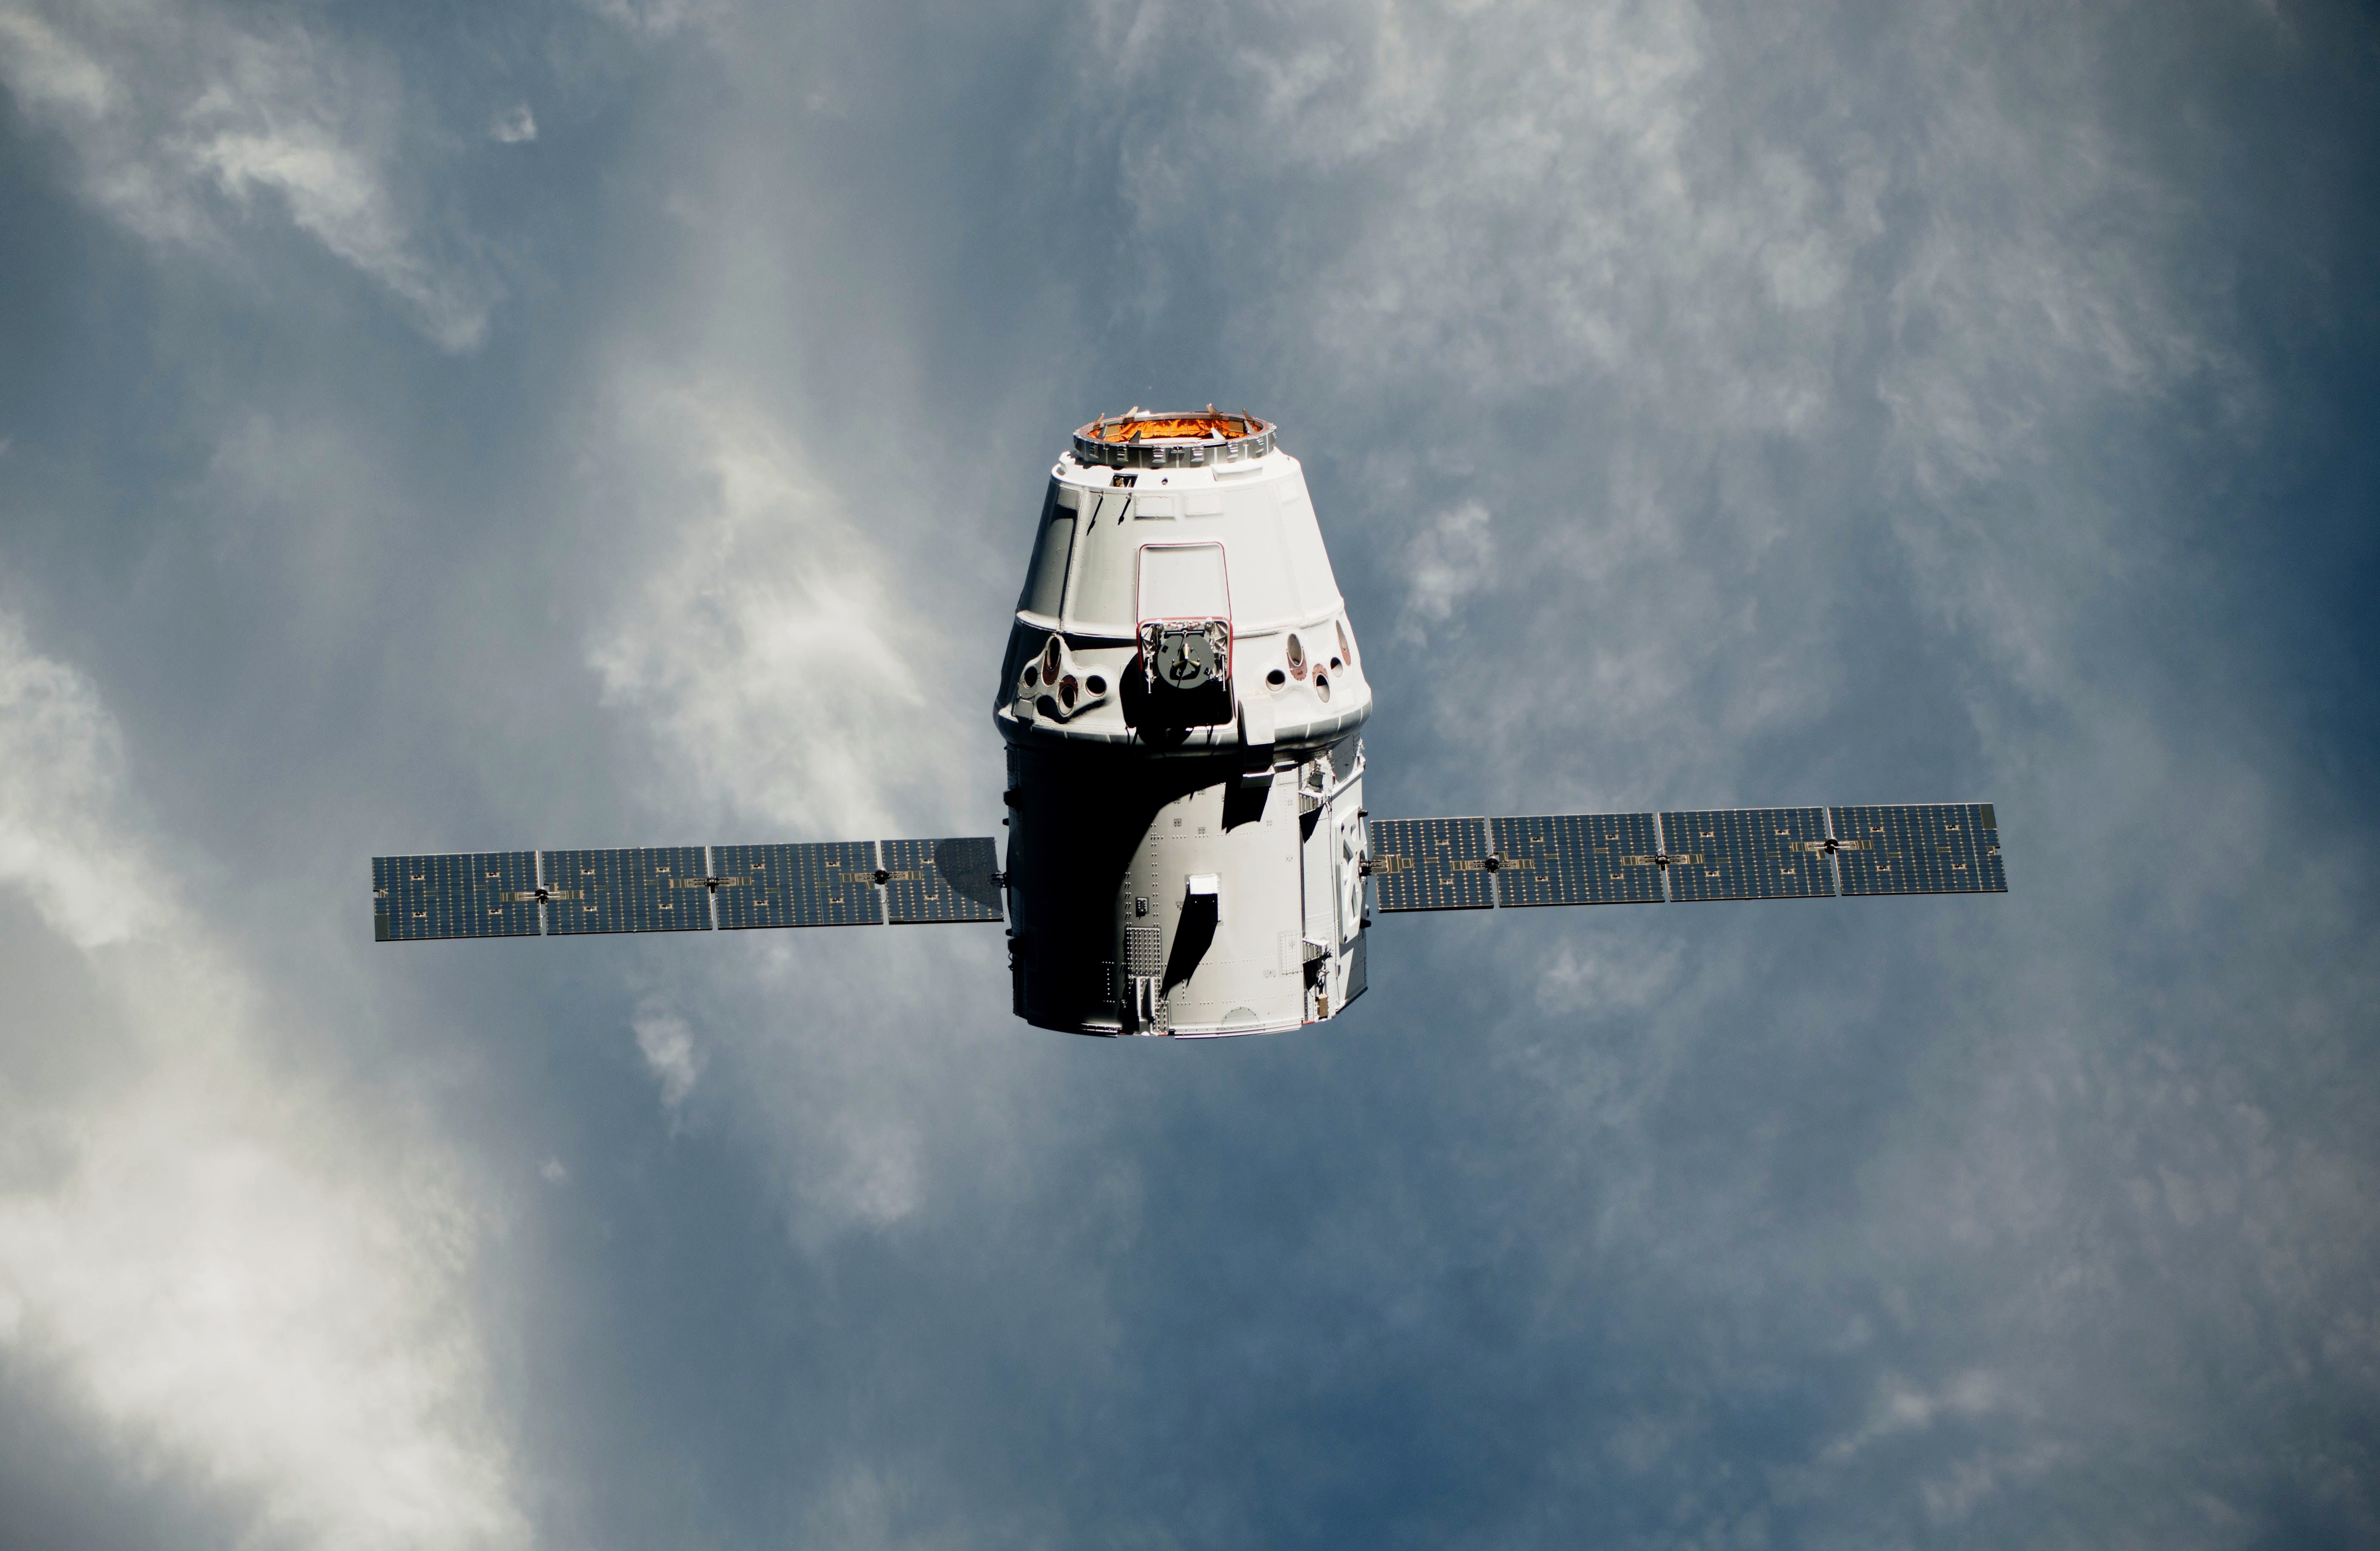 Spacex 1 commercial resupply services flight